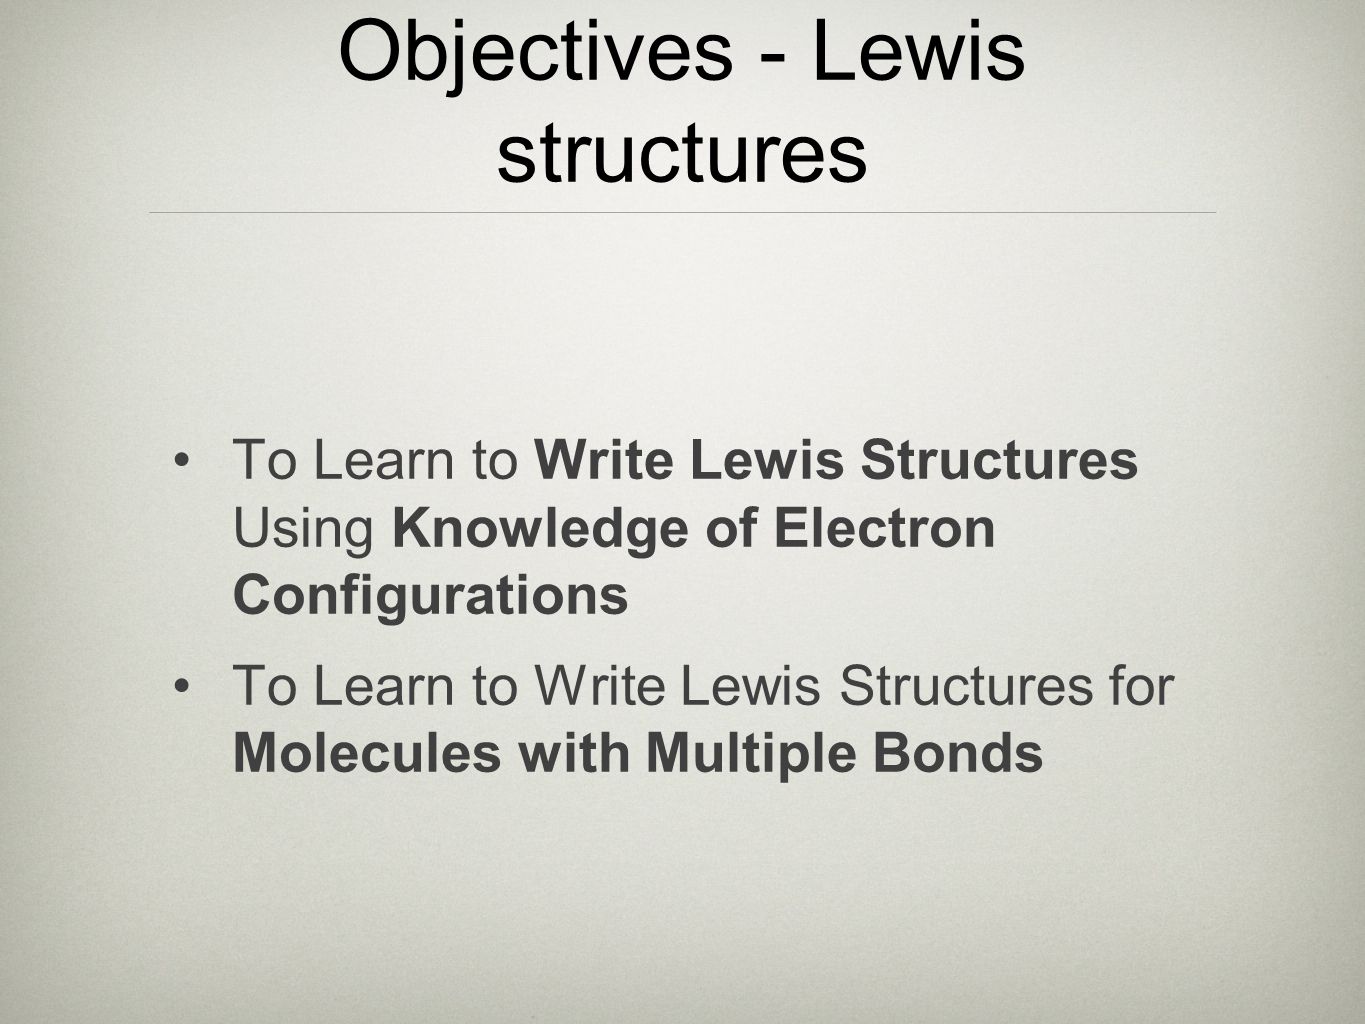 Objectives - Lewis structures